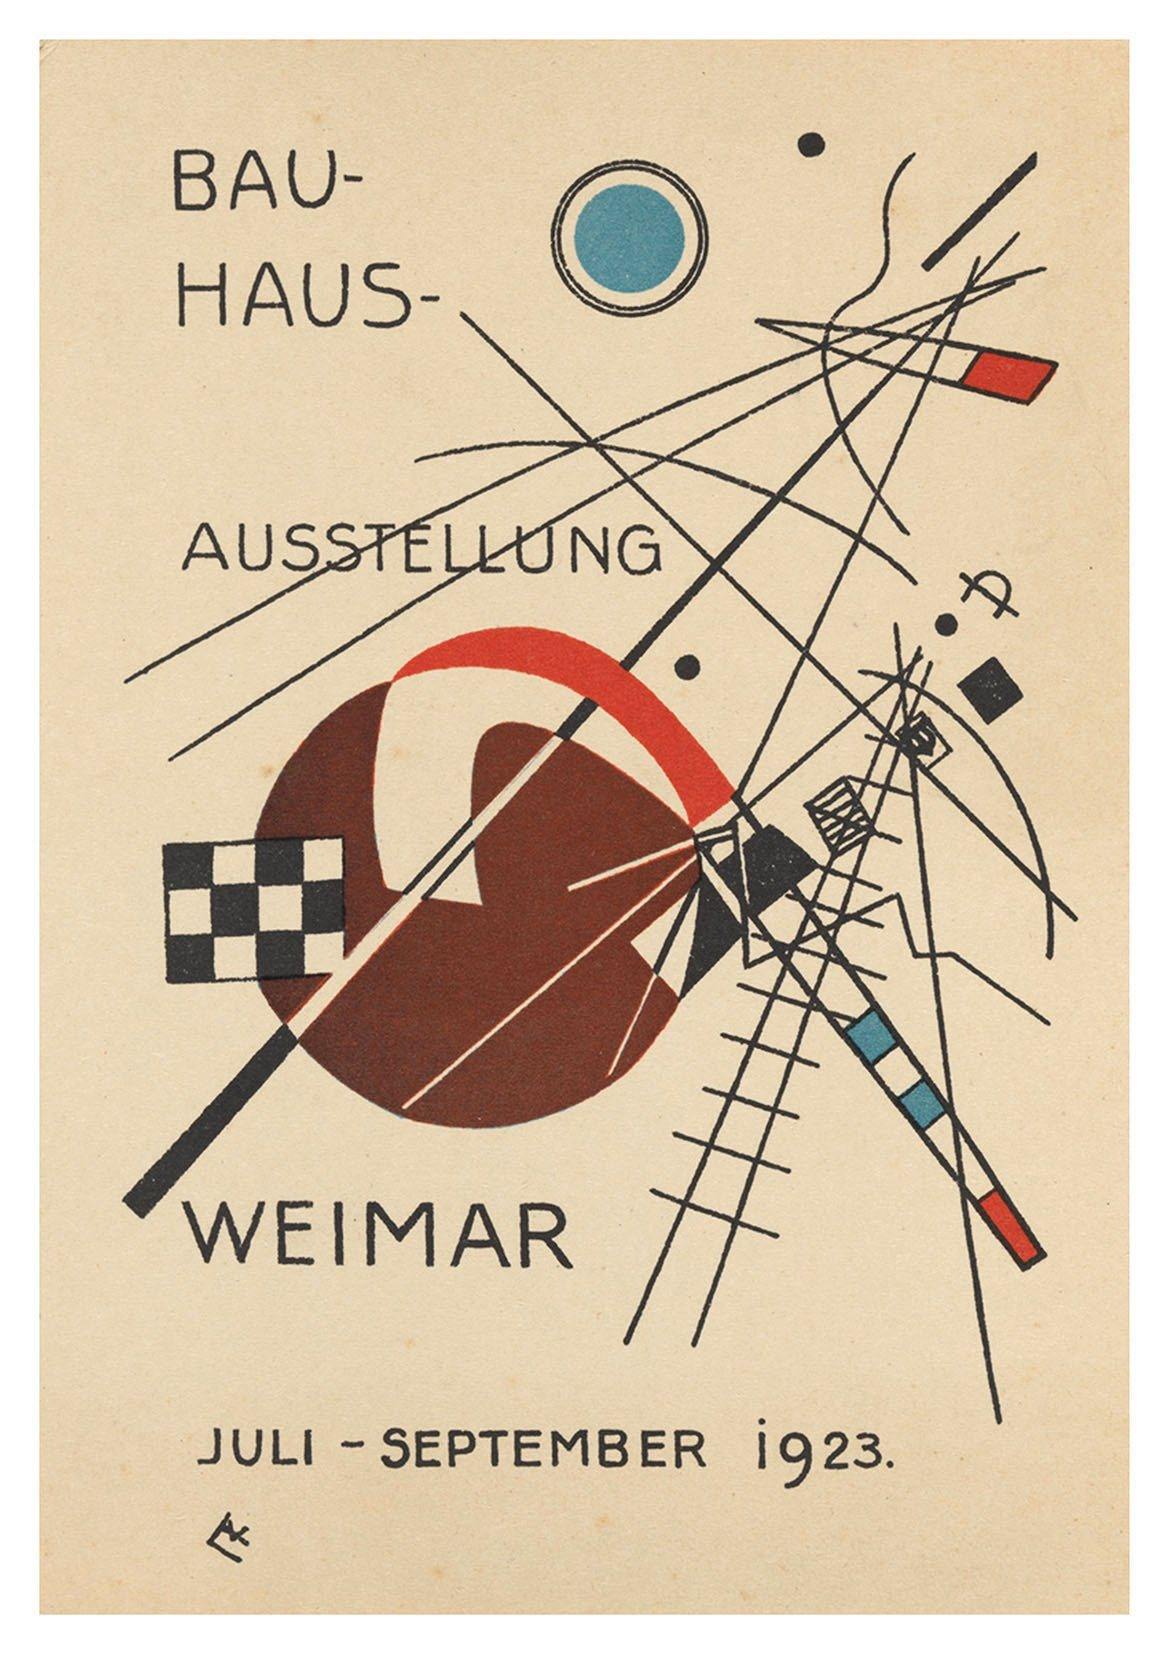 BAUHAUS EXHIBITION POSTER: Reproduction Gallery Poster - Pimlico Prints